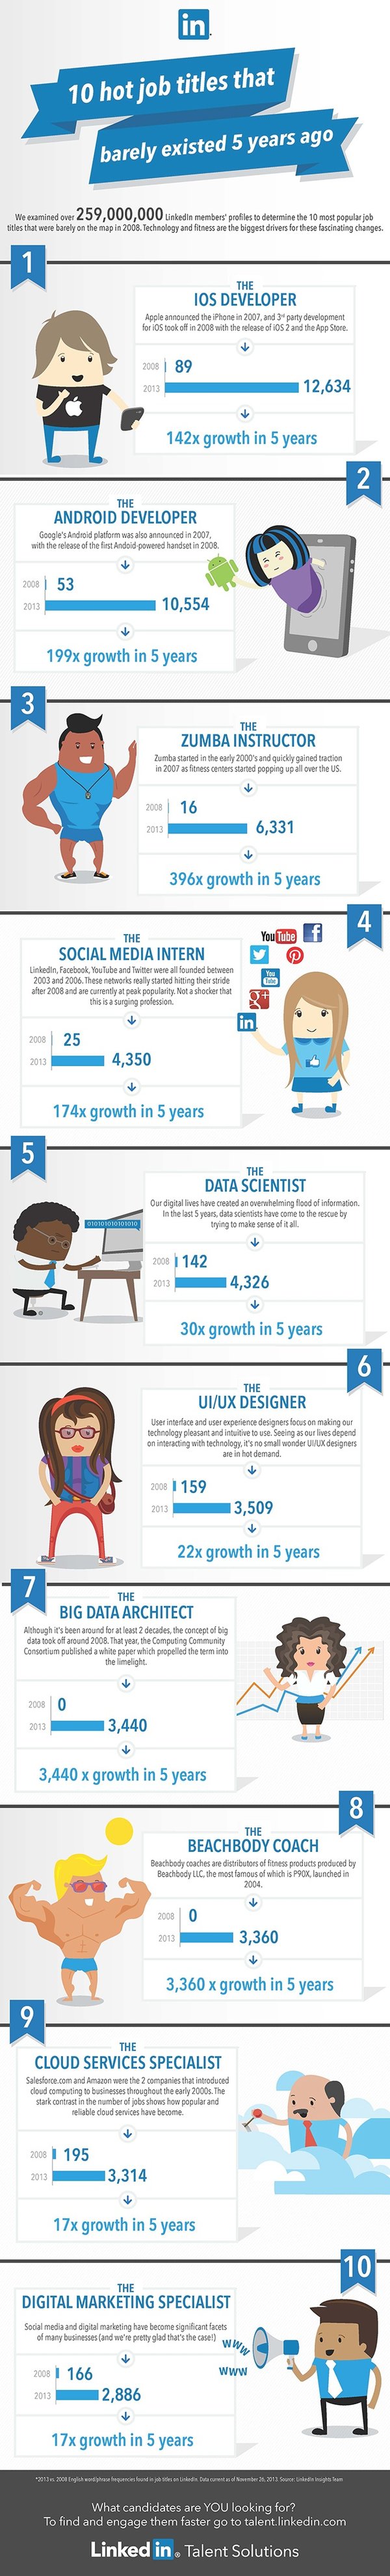 10 Popular Job Titles That Barely Existed 5 Years Ago [Infographic] - by TINYpulse